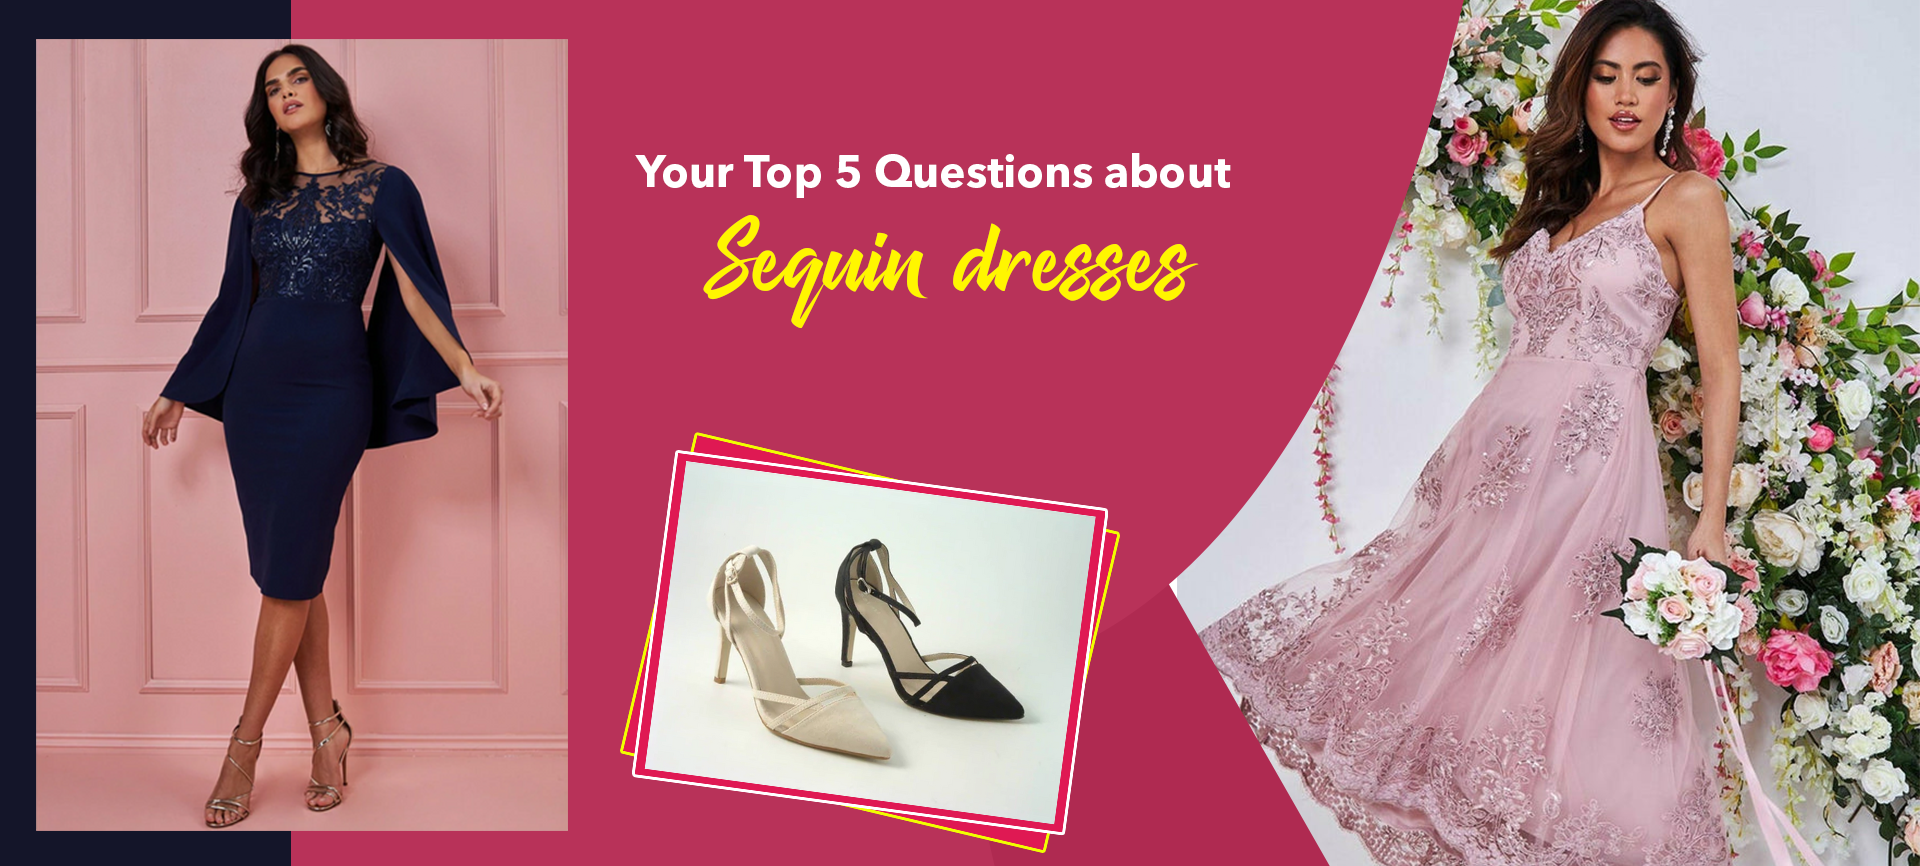 Your Top 5 Questions about Sequin Dresses